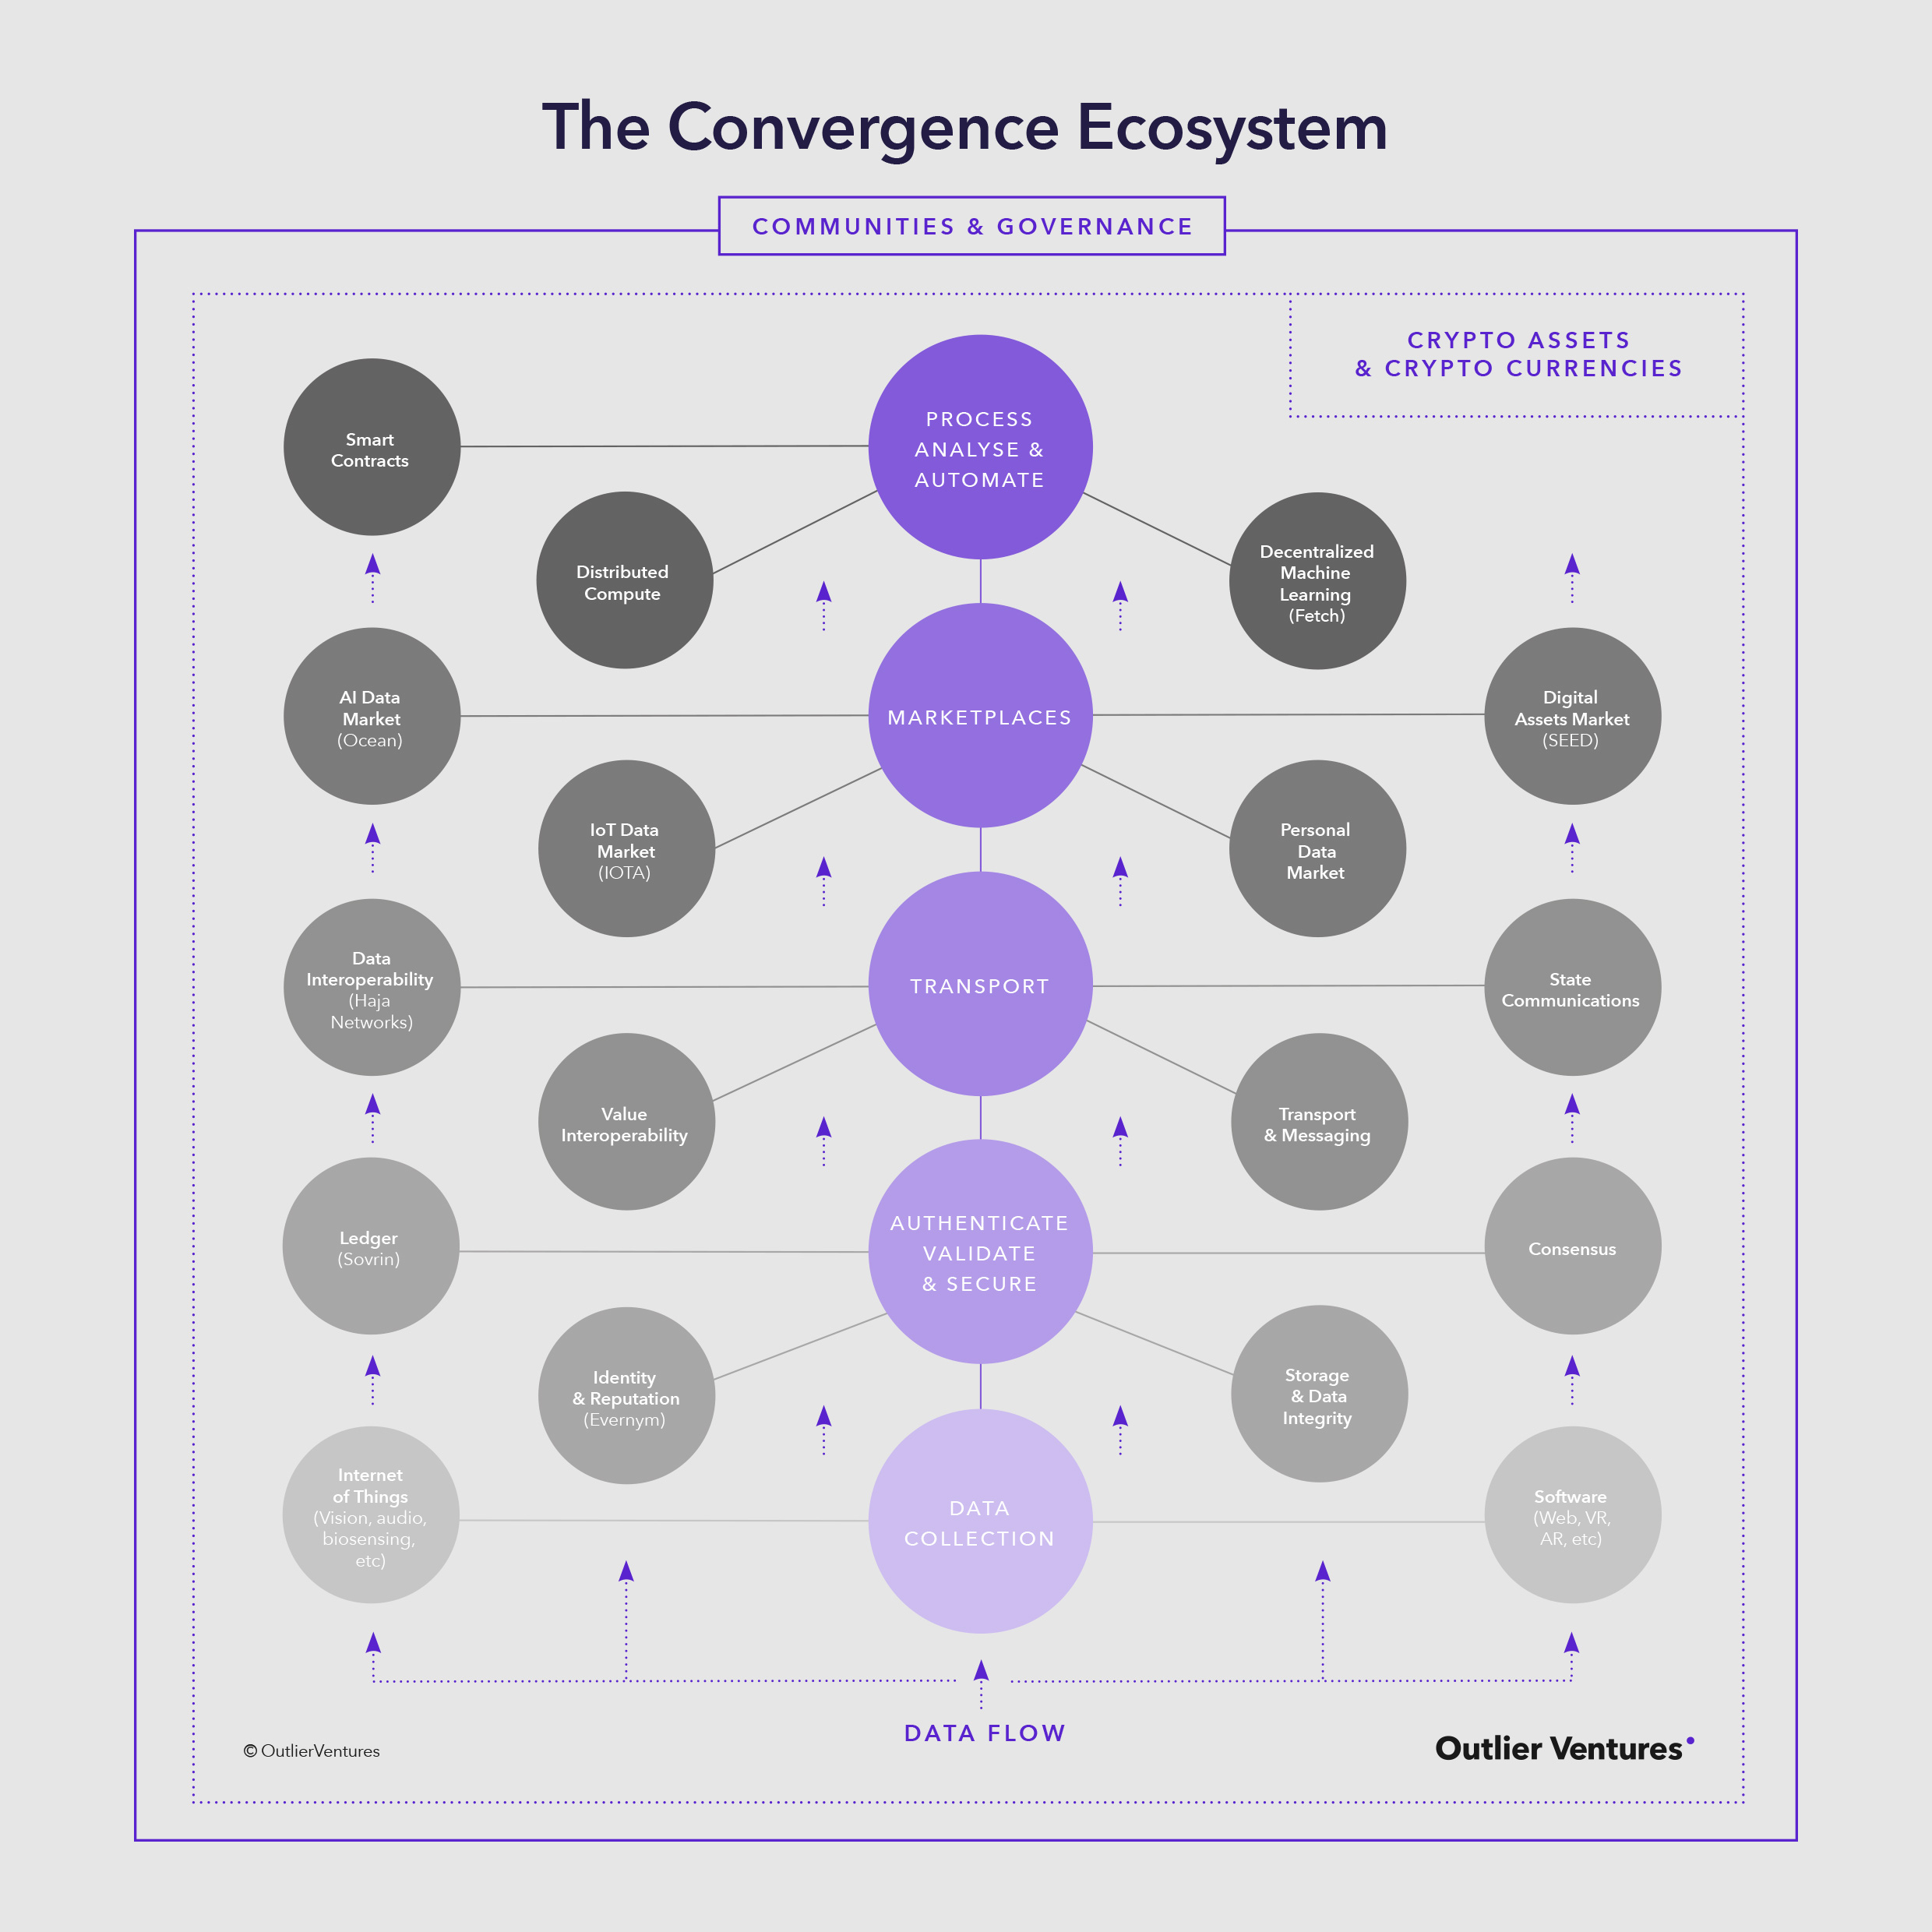 Introducing the Convergence Ecosystem Outlier Ventures